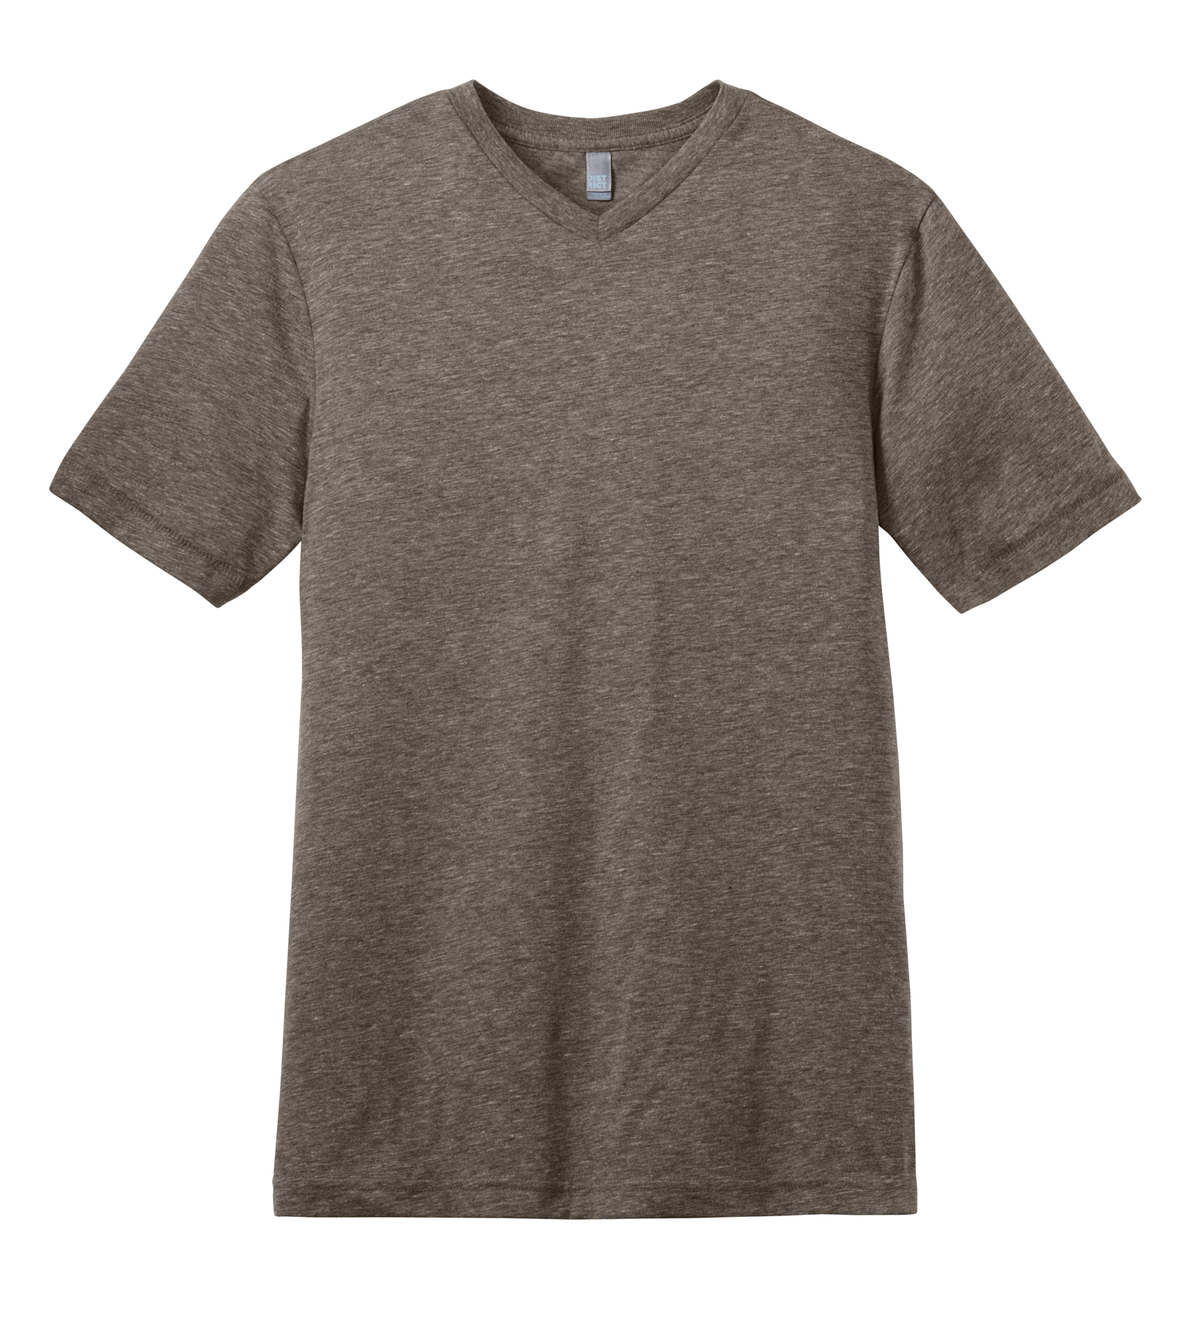 District - Young Mens Tri-Blend V-Neck Tee | Product | SanMar